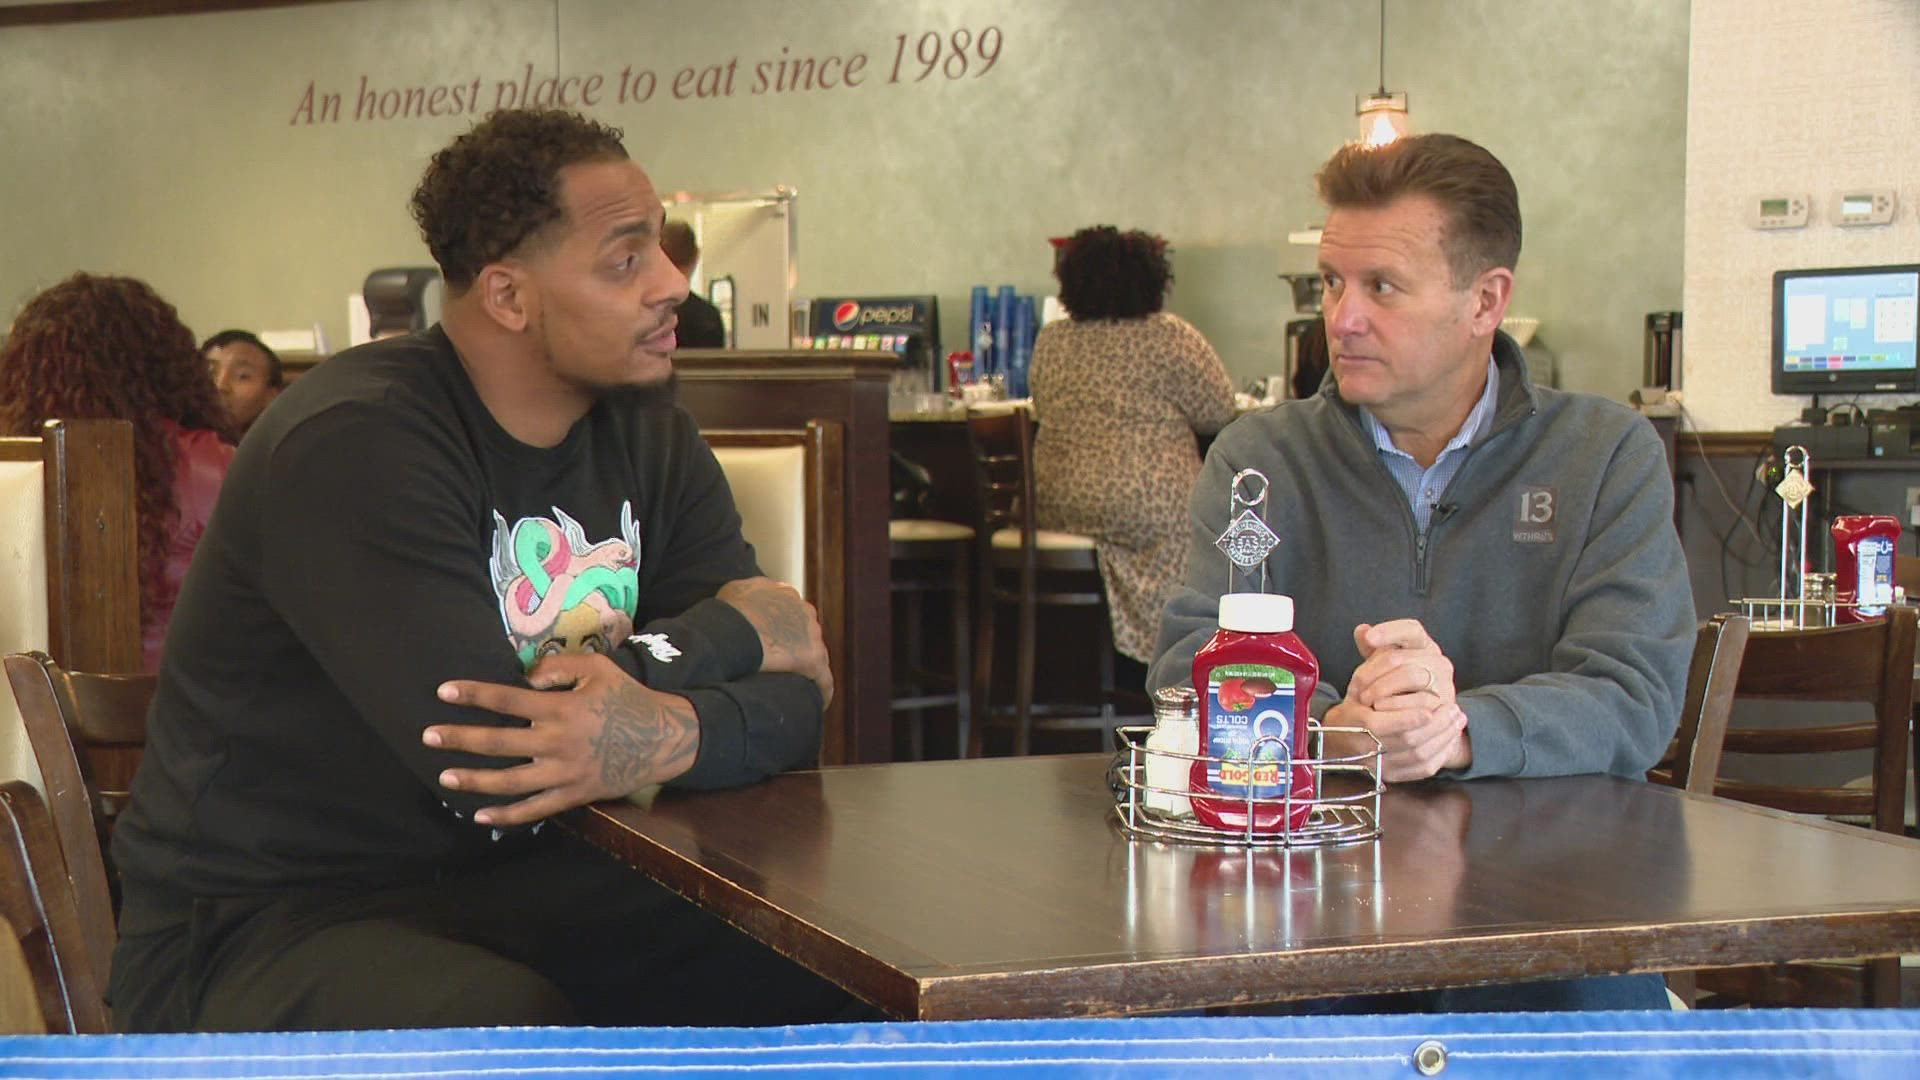 Dave Calabro went to Lincoln Square Pancake House to check out the good news!